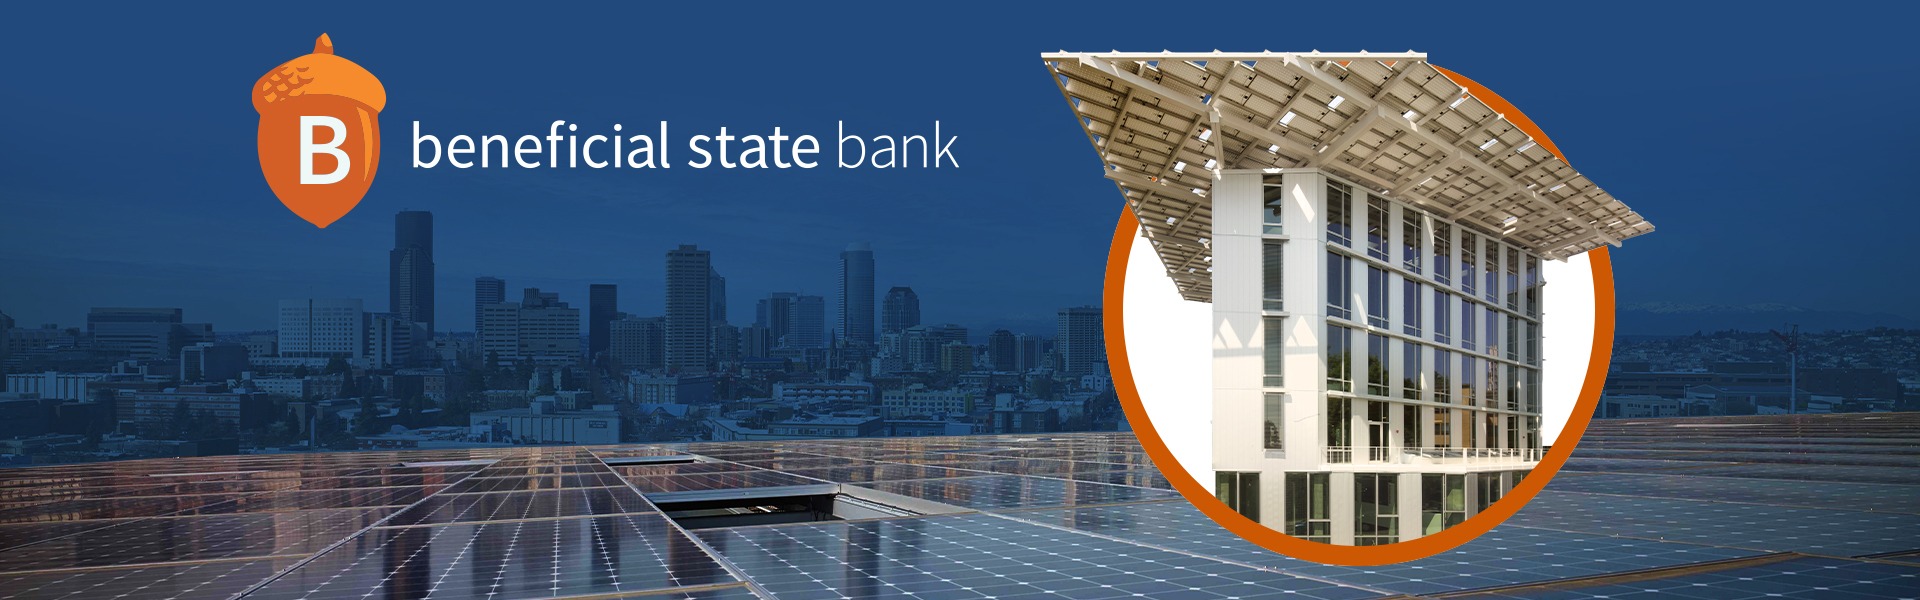 beneficial state bank logo and card